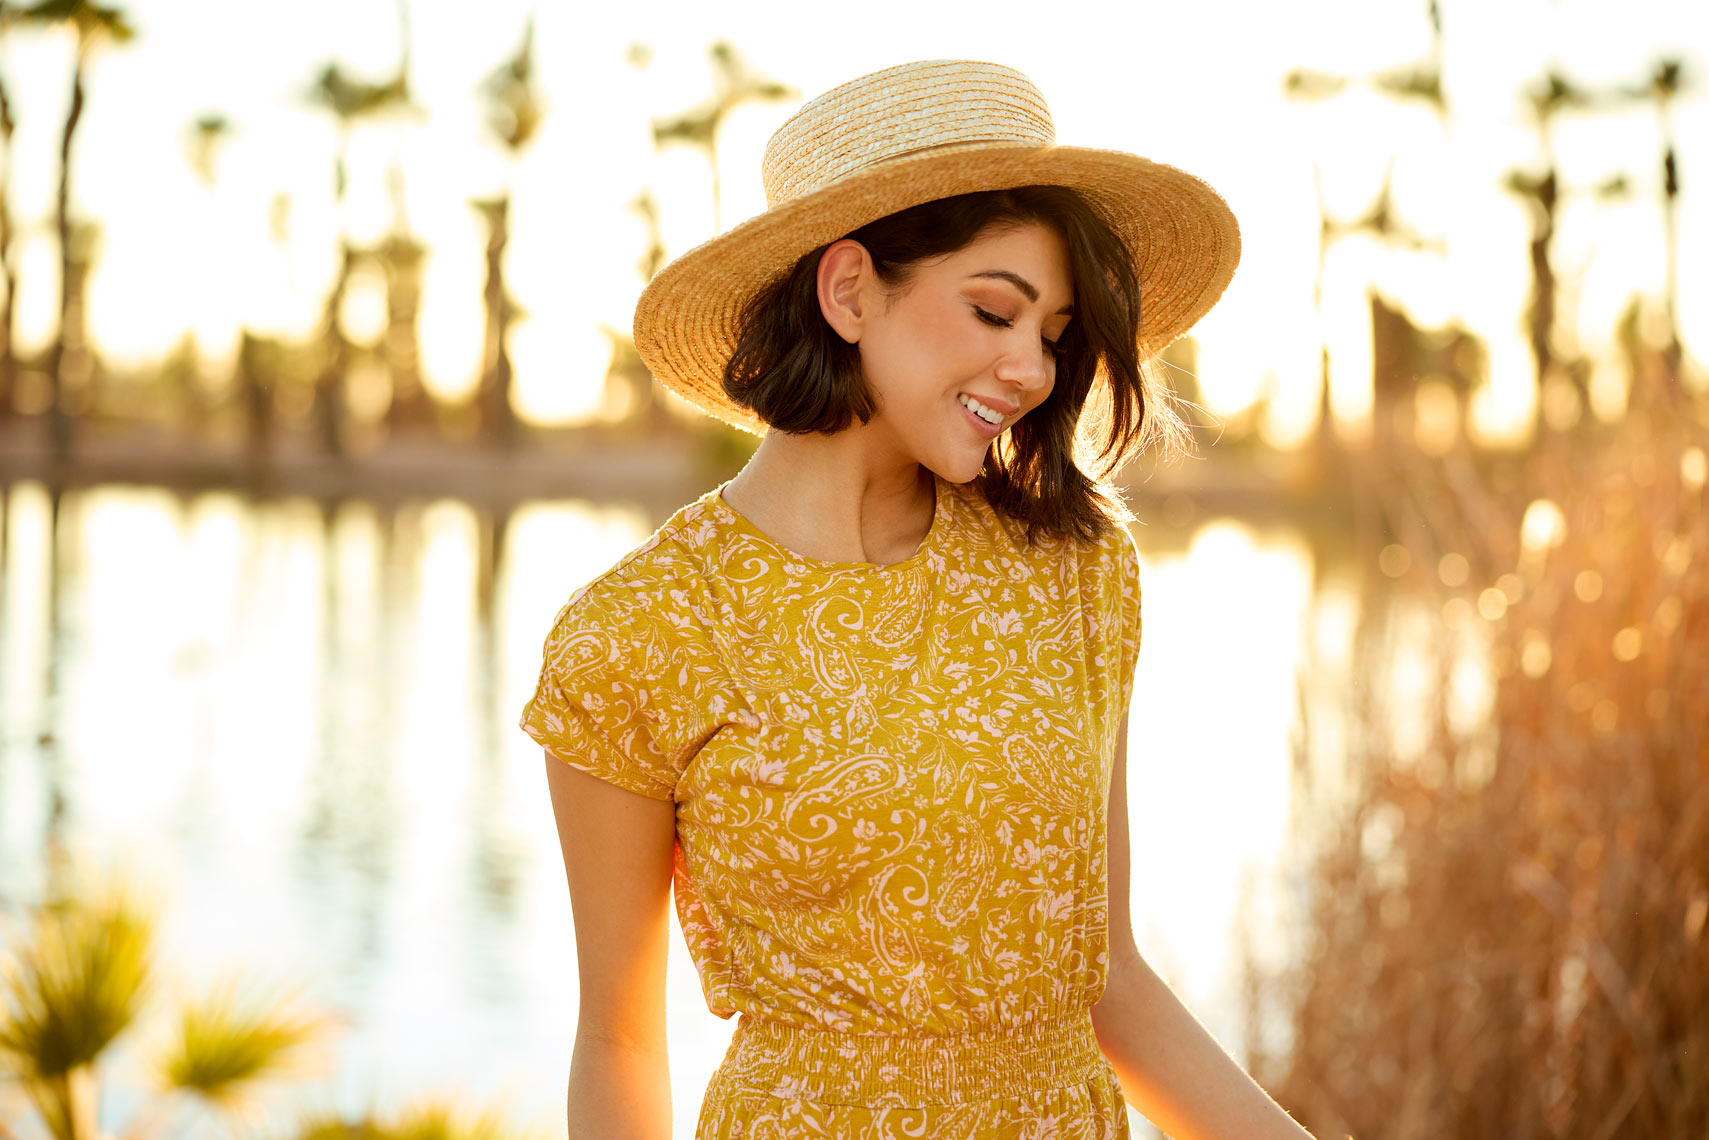 Brunette female in yellow sundress and hat